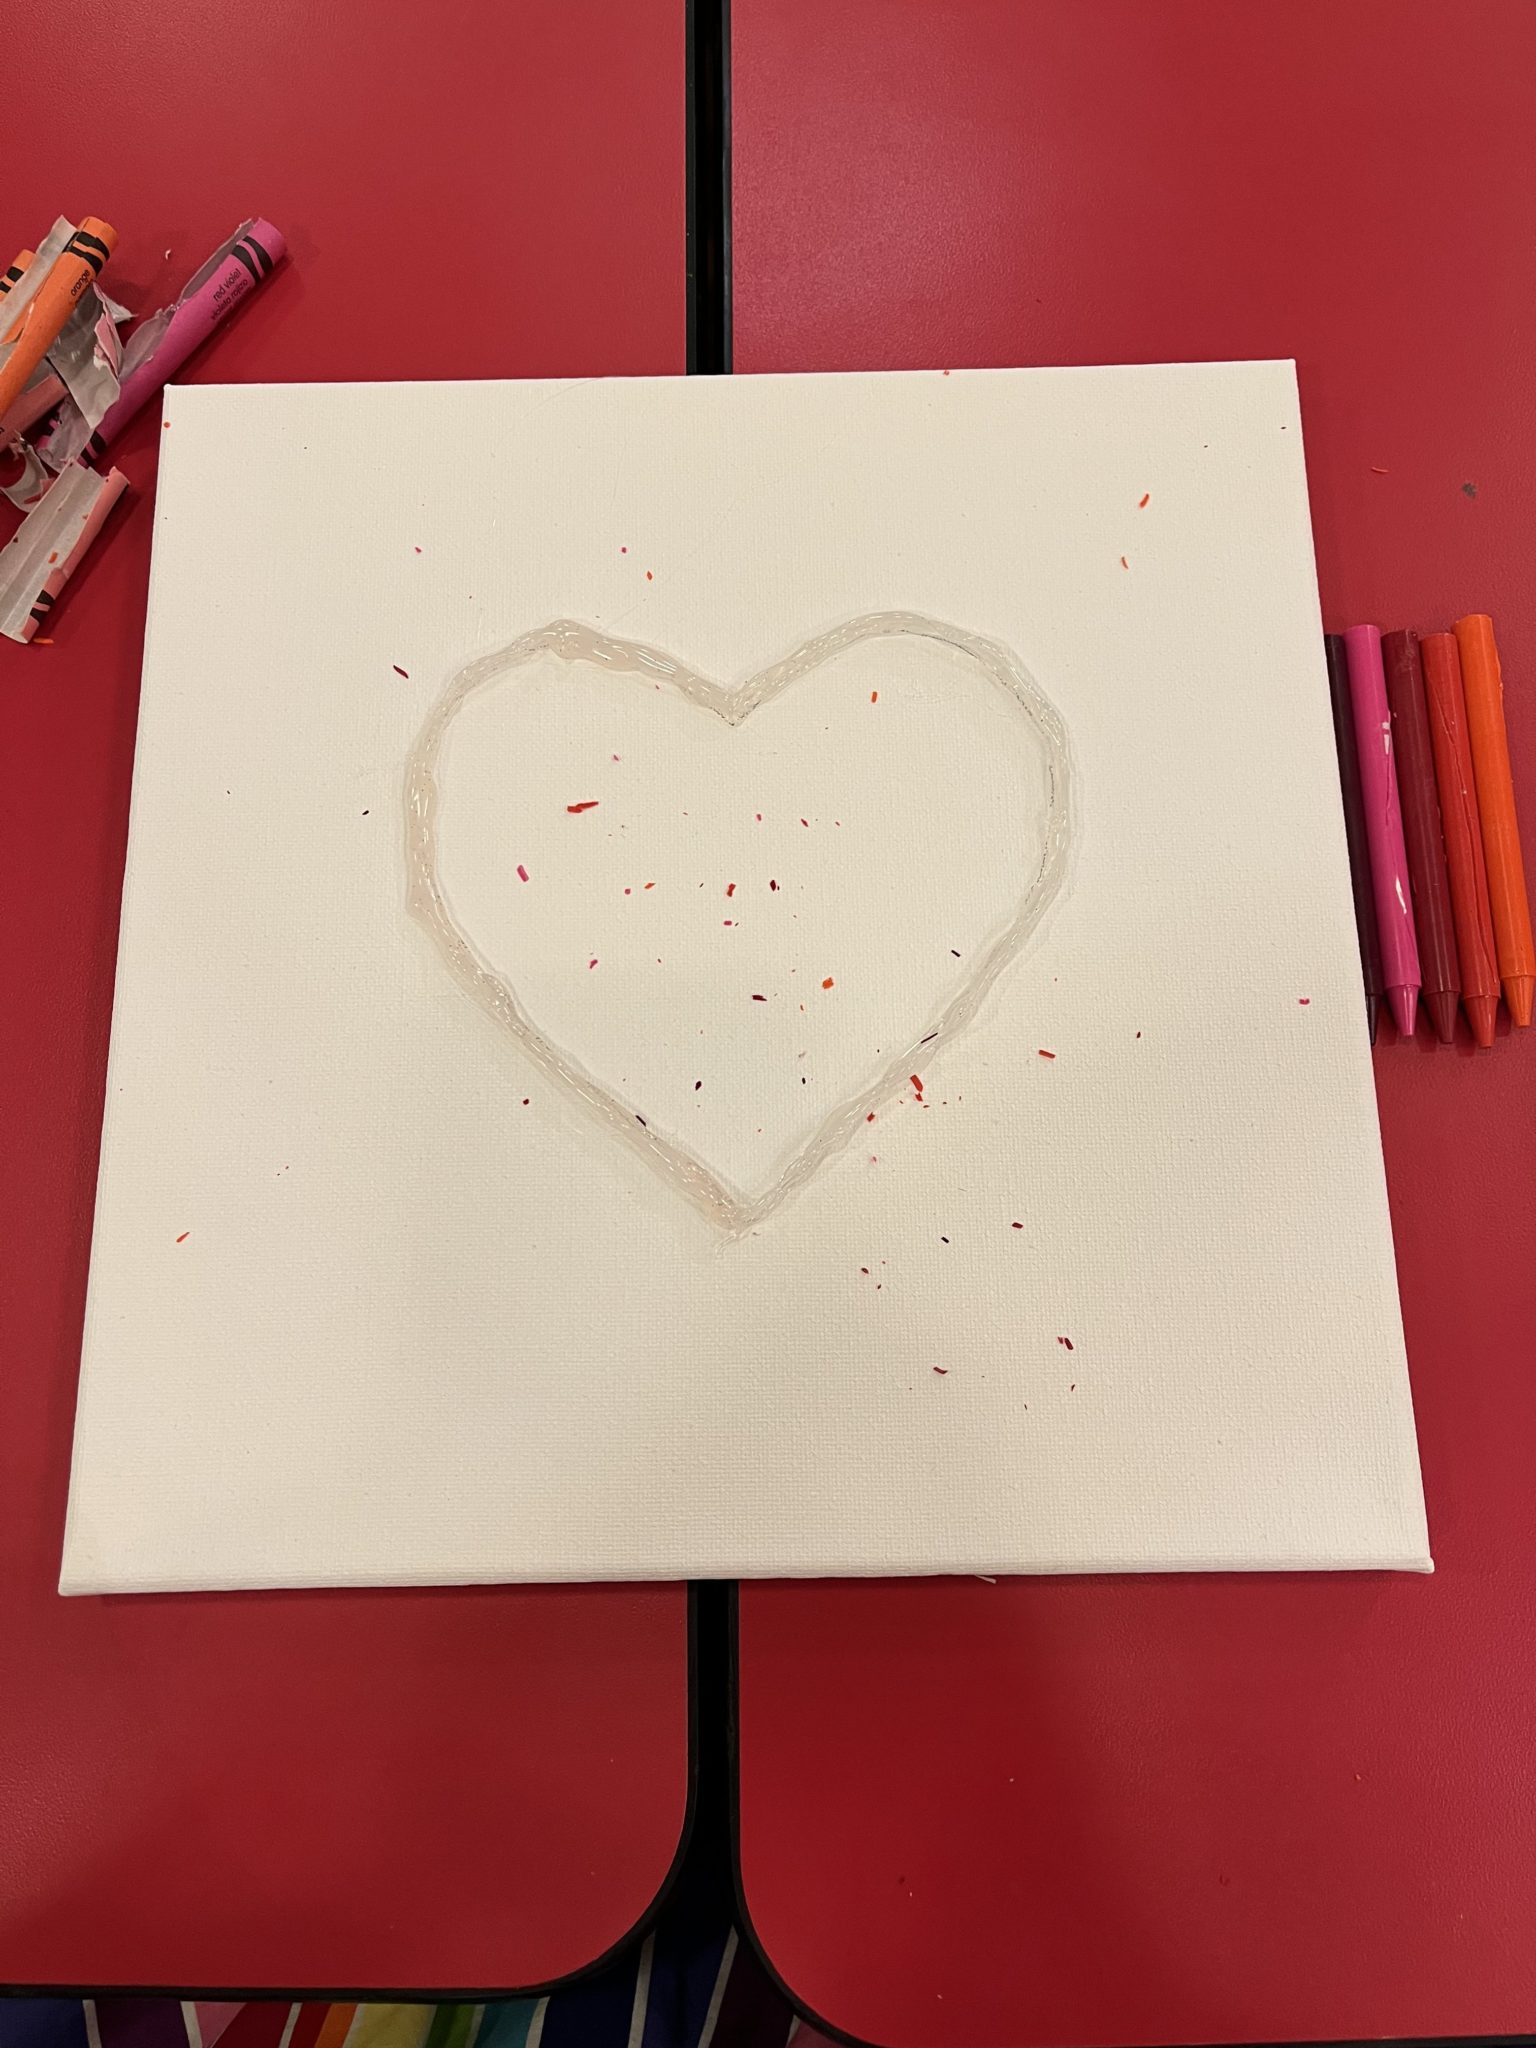 Outline of a heart in hot glue on canvas